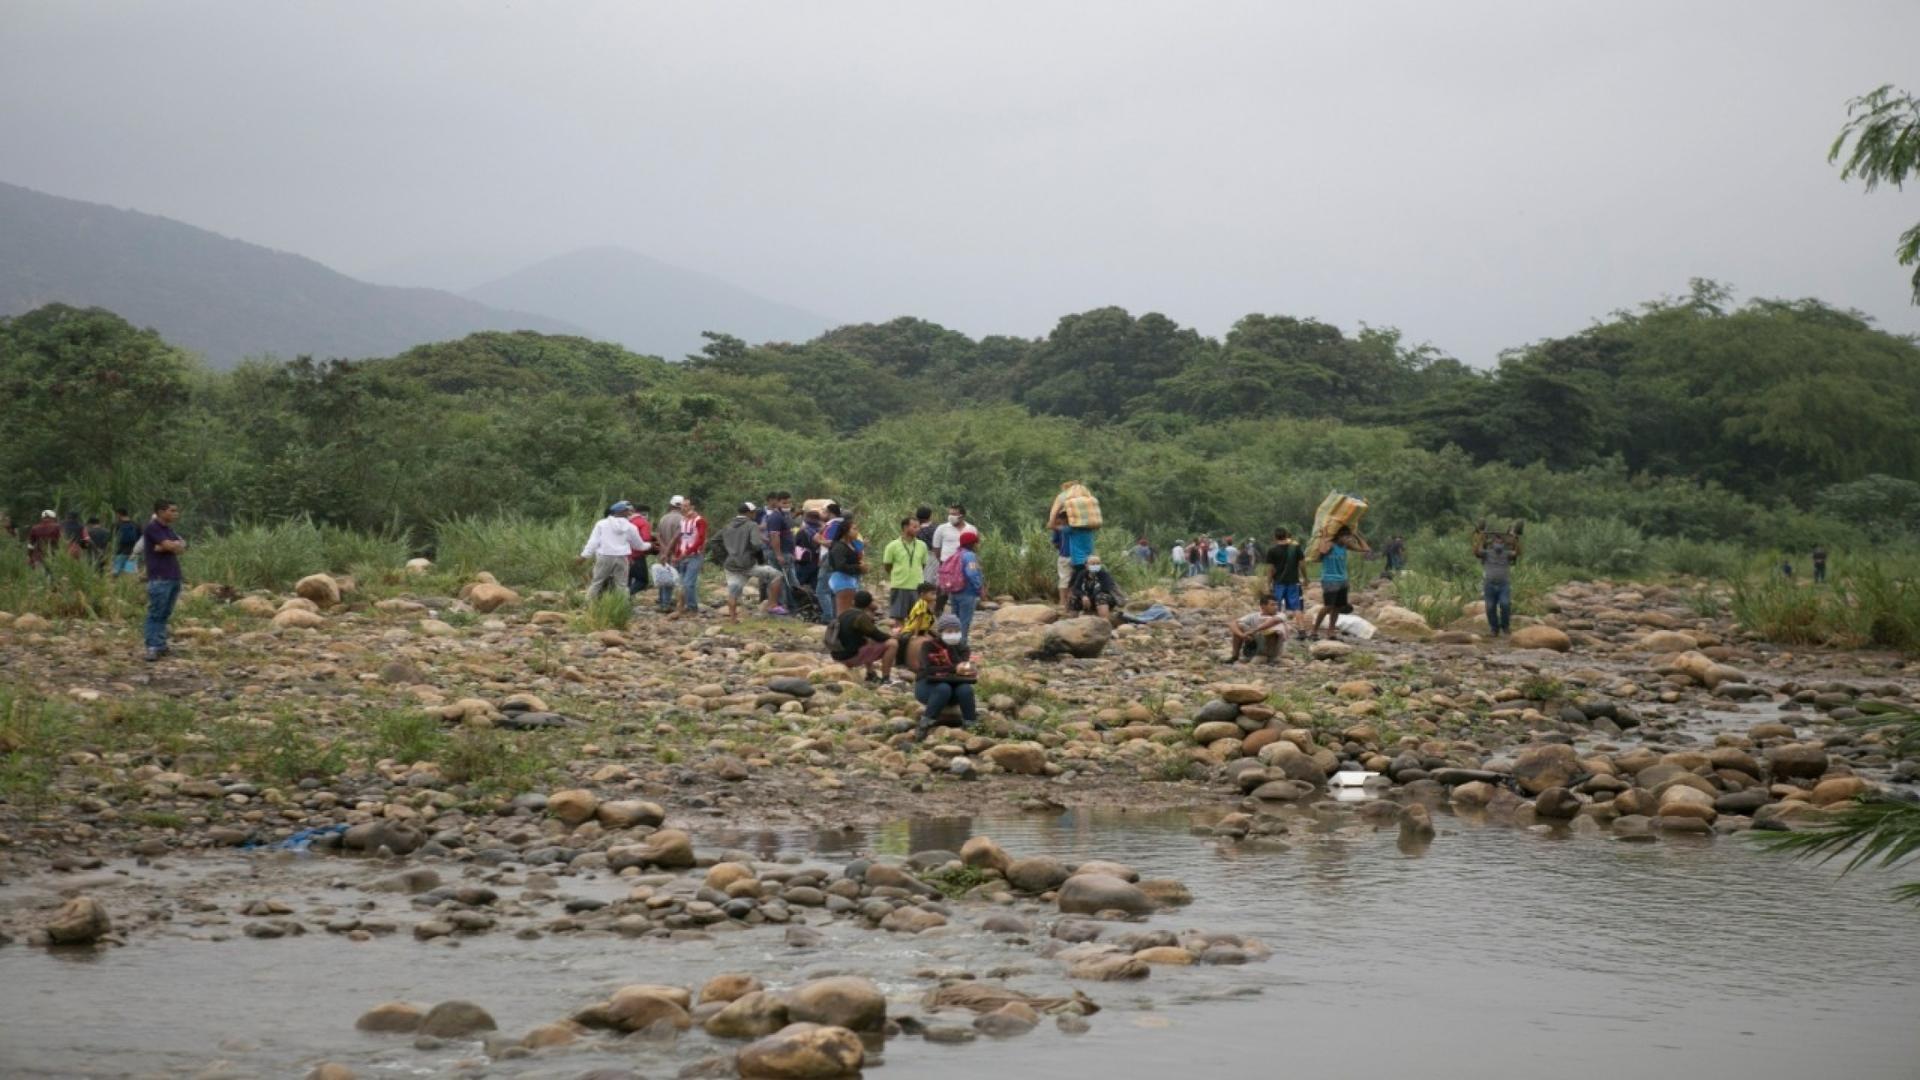 While the border between Colombia and Venezuela was closed for seven years, people found other, illegal ways to cross between the two countries.